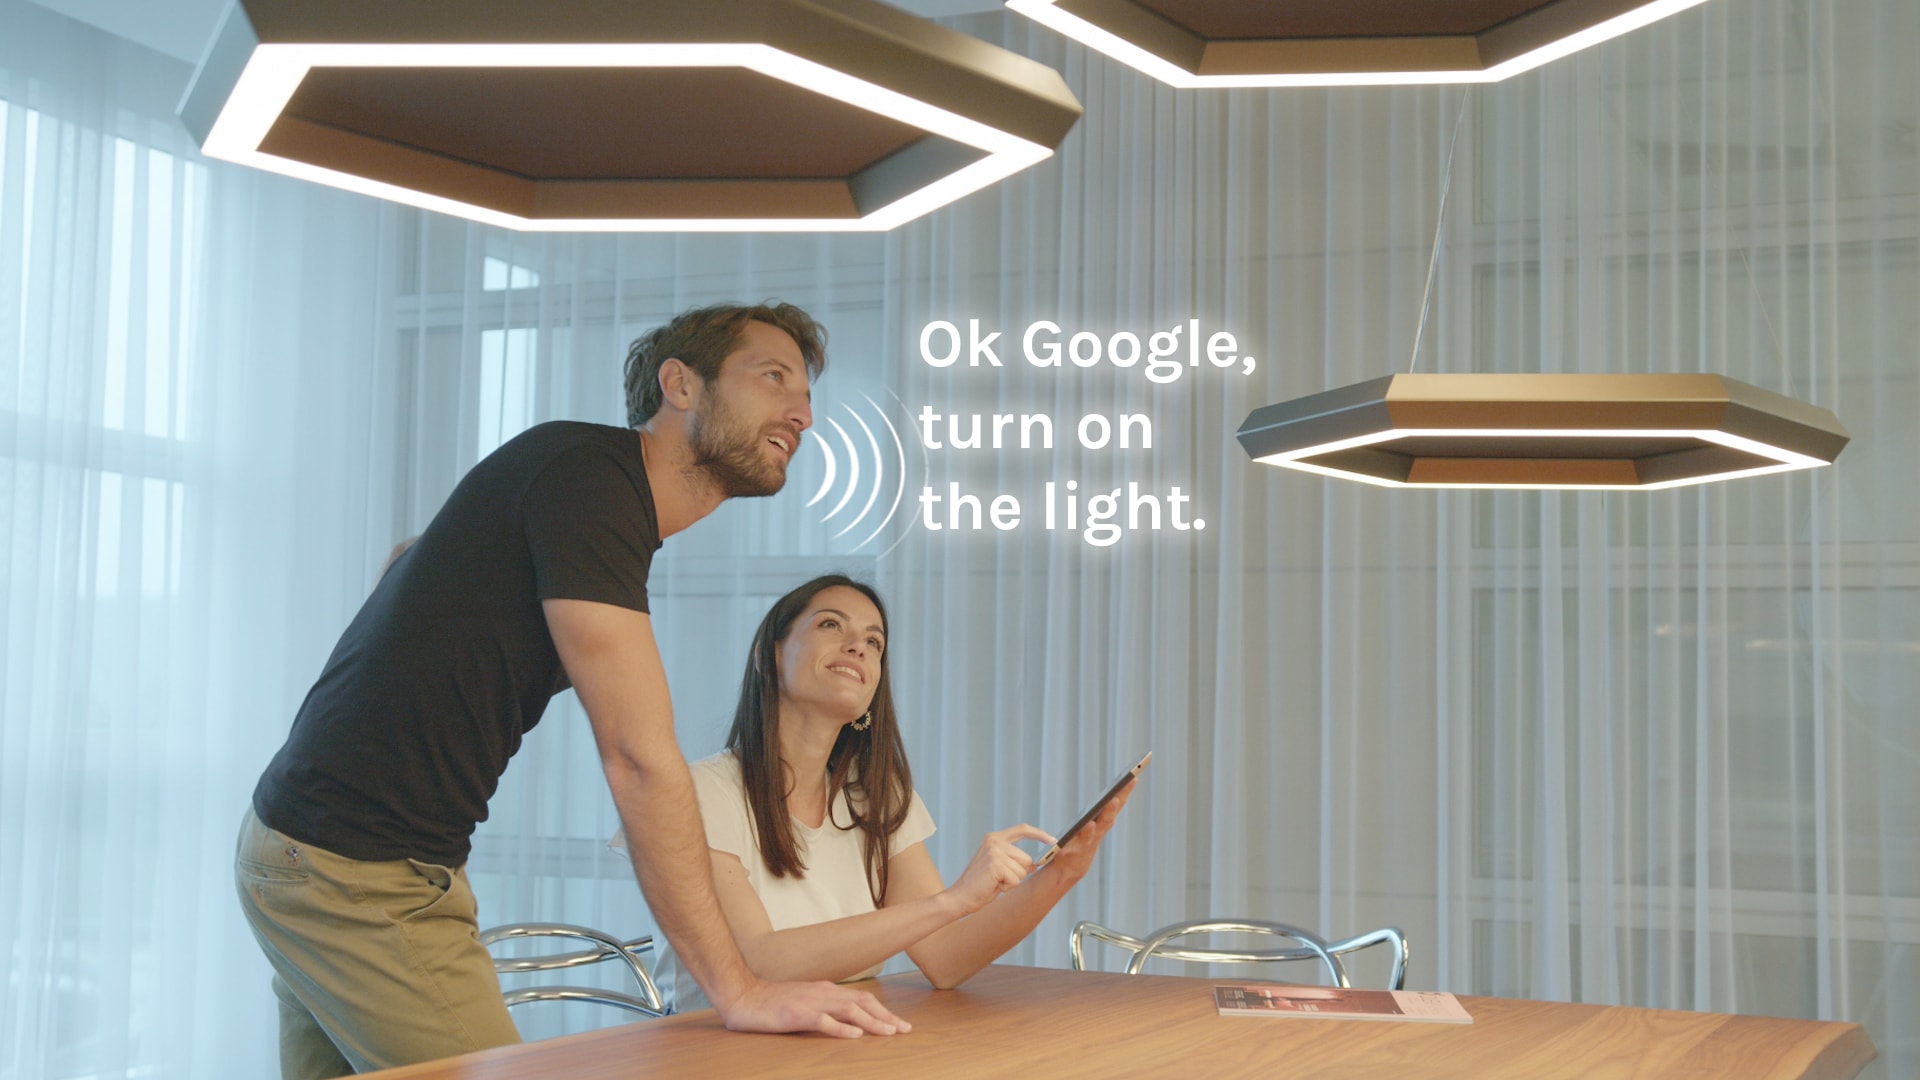 Ok Google, on the light": here's how lighting technology can make your new home more stylish | Olev